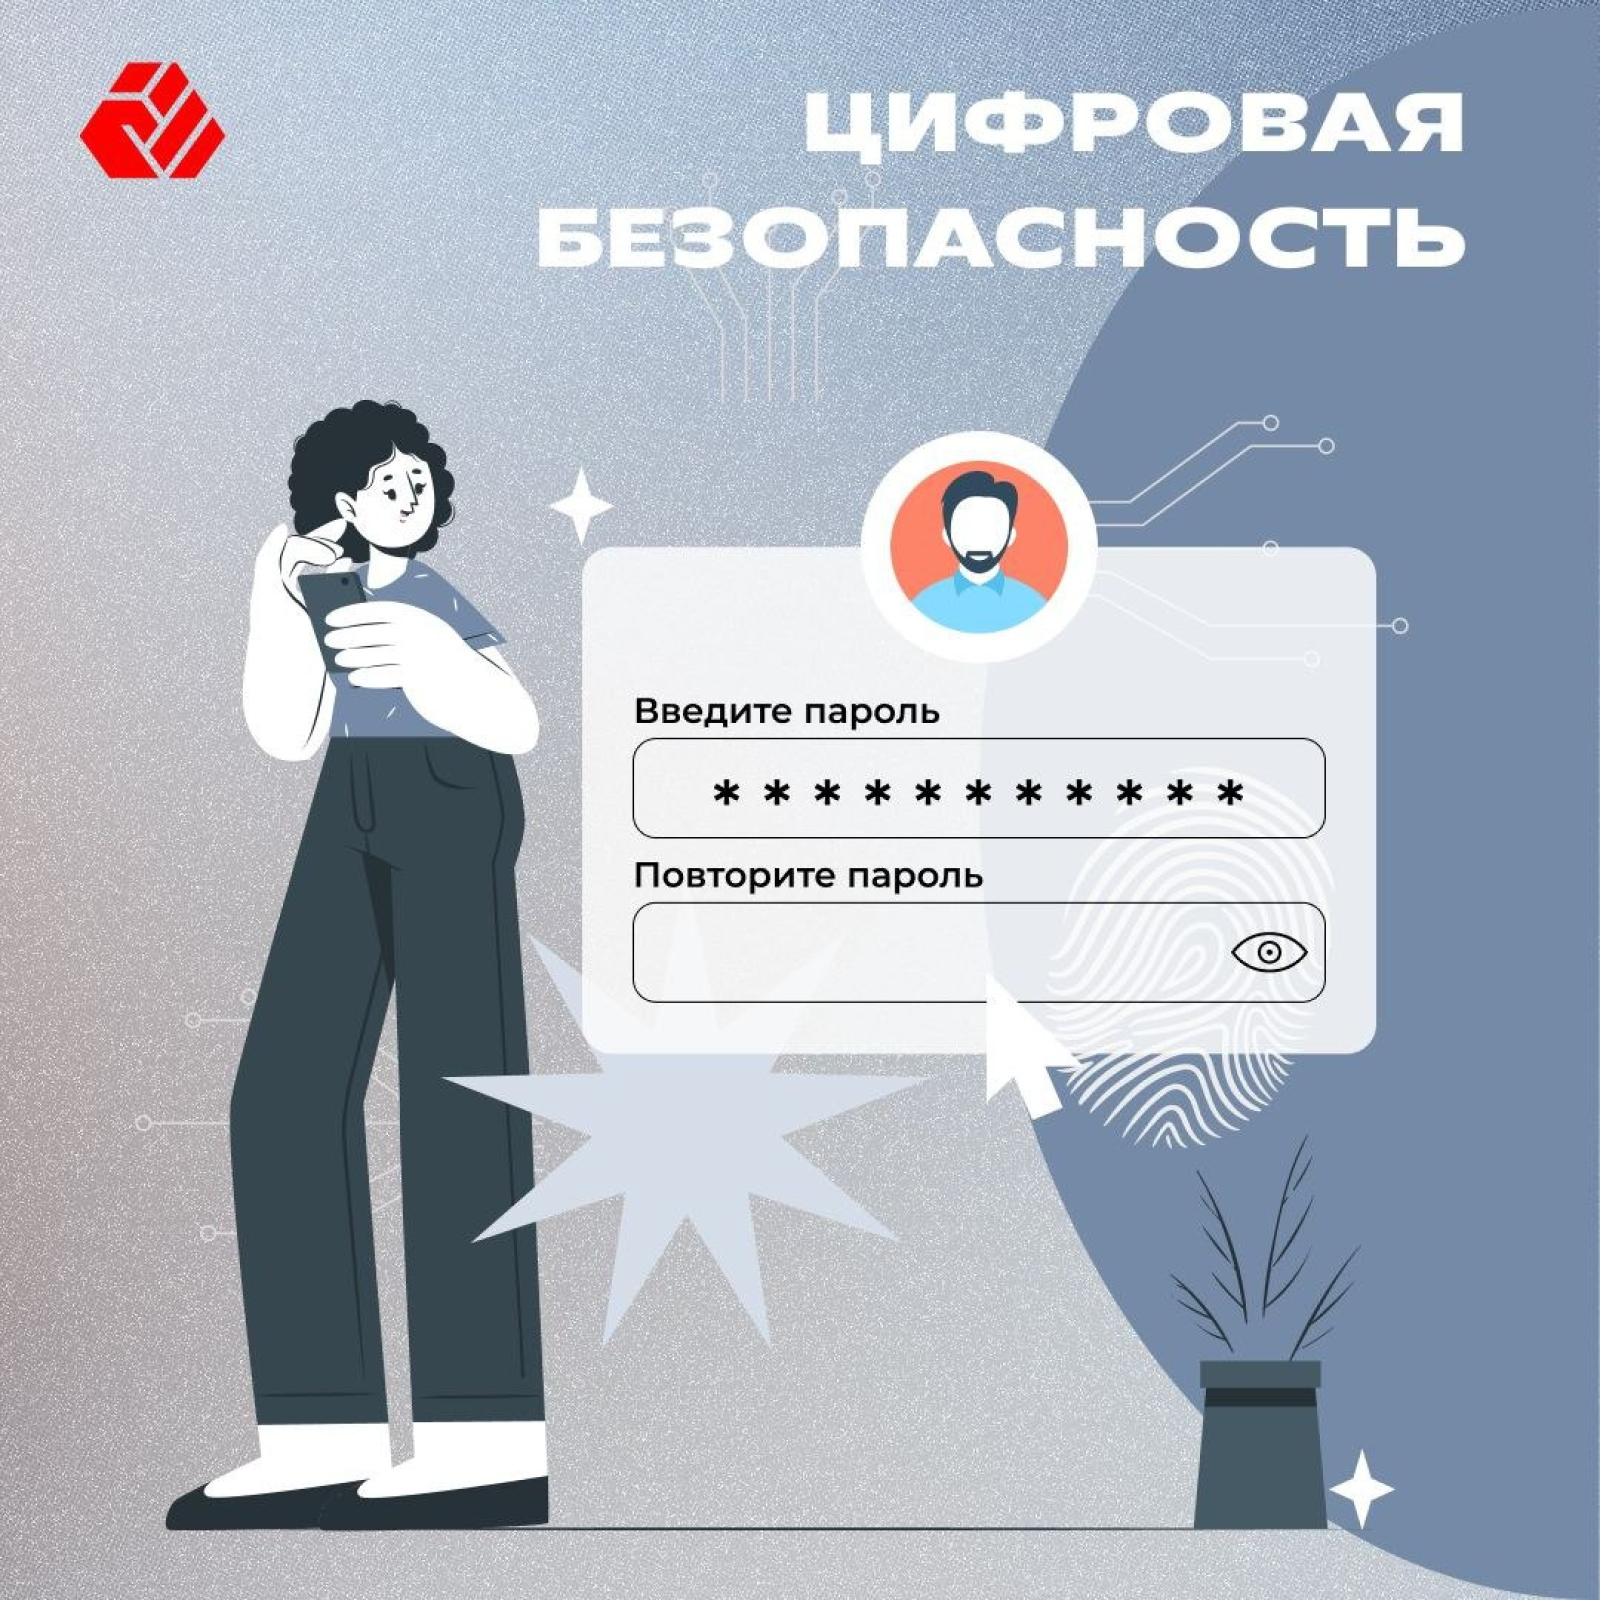 Digital security is one of the most important rules of life in today's Belarus